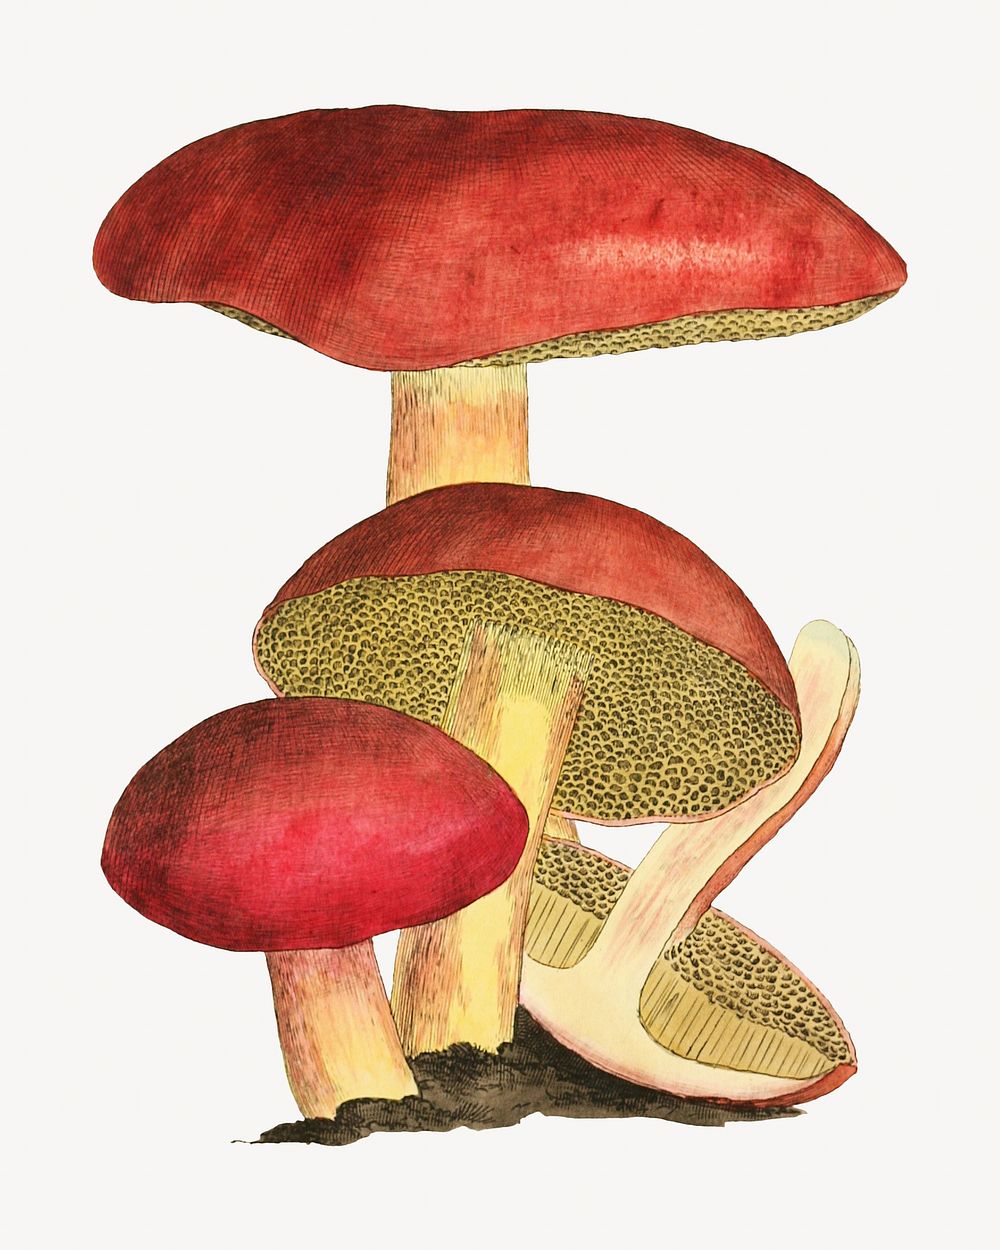 Red mushroom, vintage botanical illustration by James Sowerby. Remixed by rawpixel.